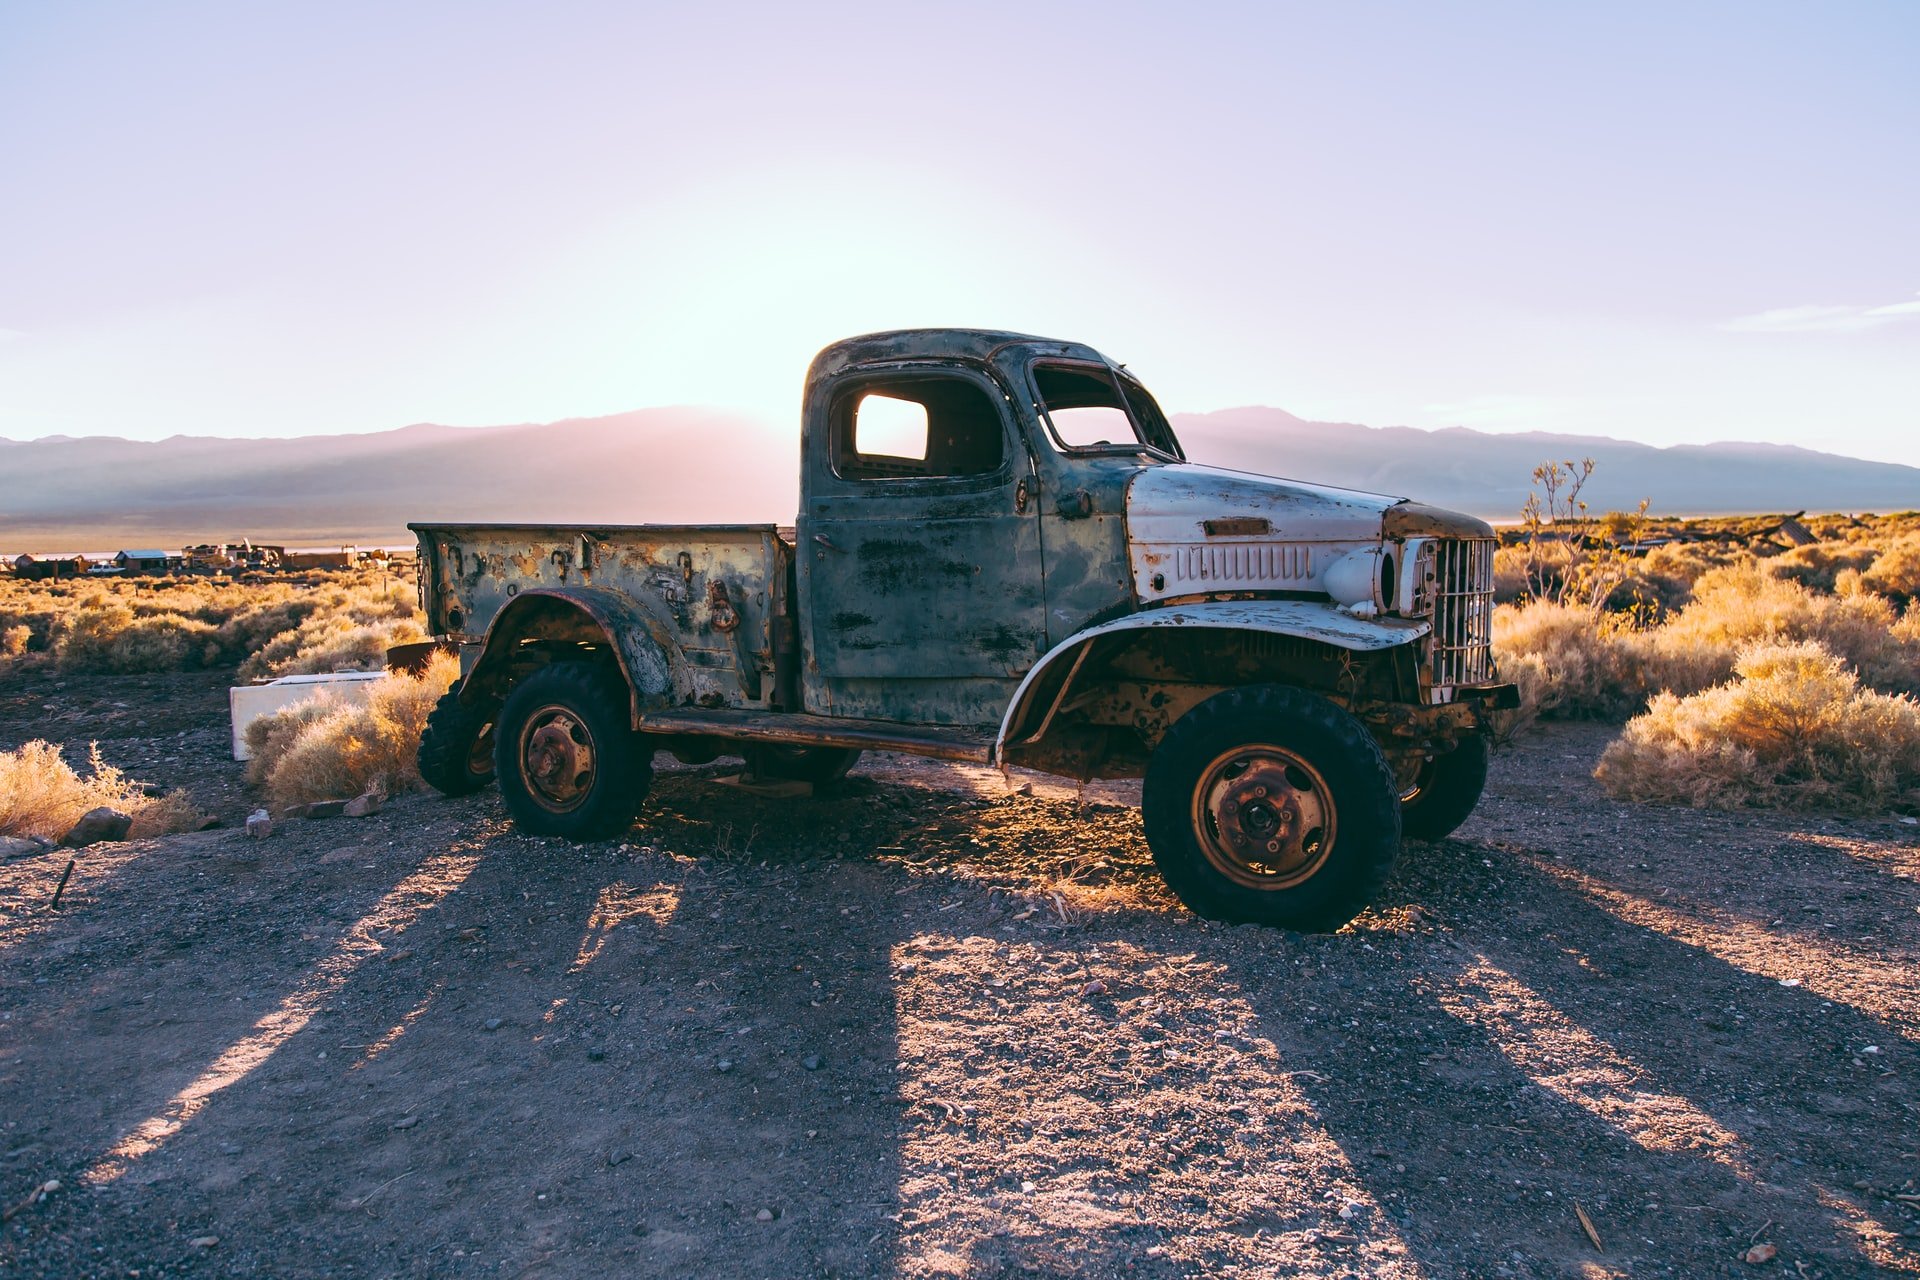 He owned an old truck. | Source: Unsplash